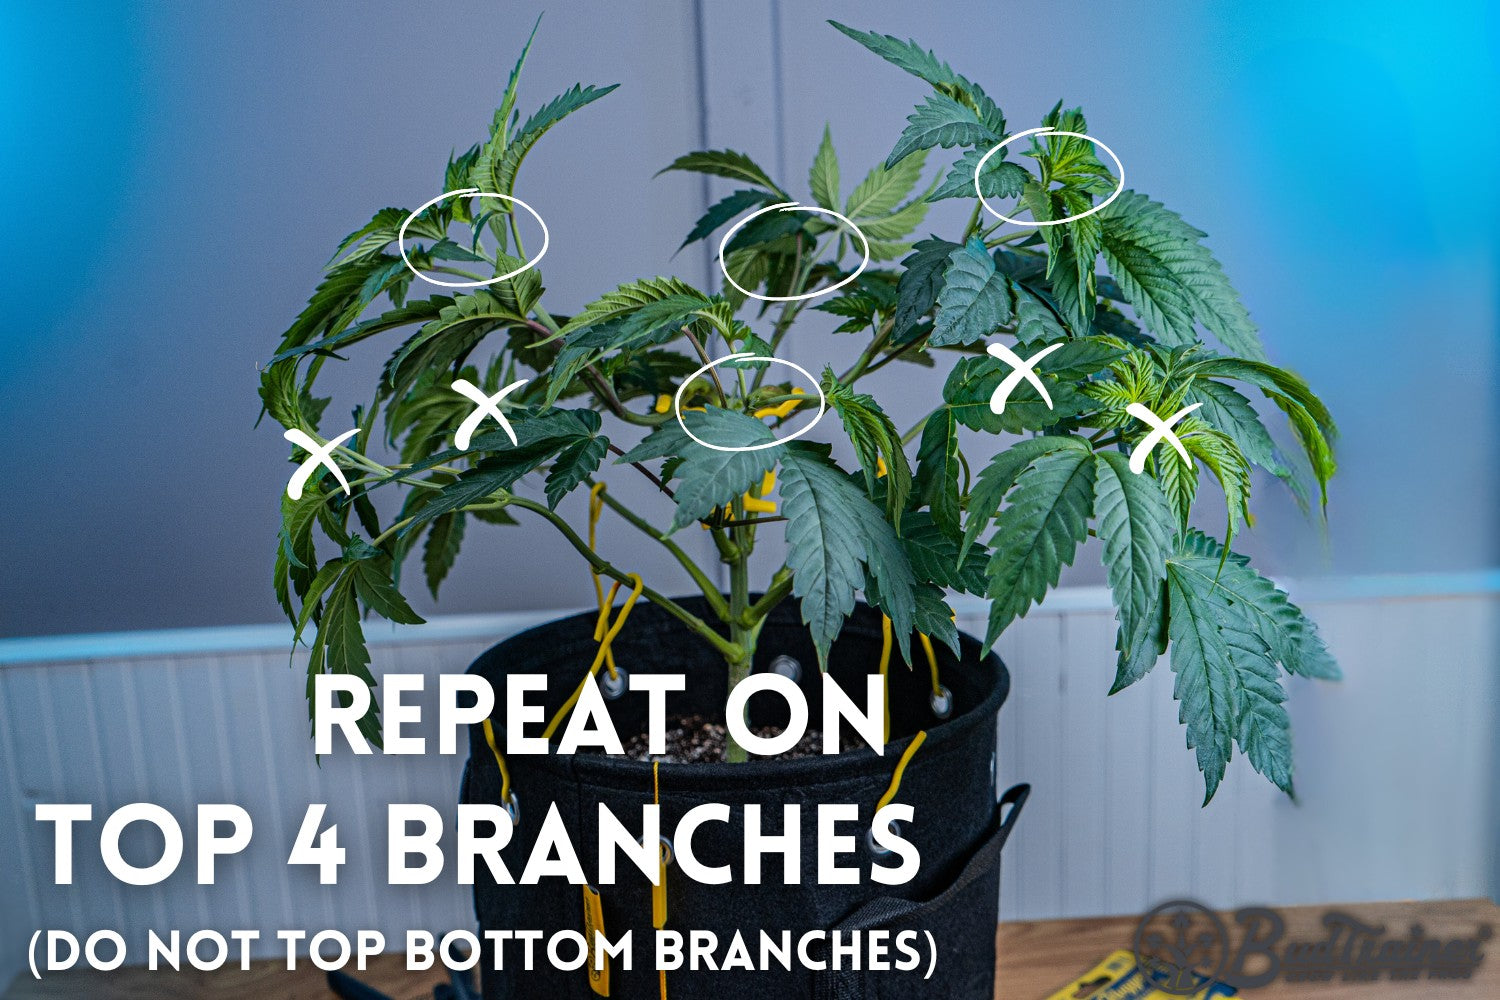 For the next step, the topping process should be repeated on the top four branches of the cannabis plant. It’s important to avoid topping the bottom branches. This selective topping encourages the plant to develop multiple main colas, promoting better light distribution and potentially increasing yields. The branches to be topped are indicated, ensuring precise and consistent application of the technique.